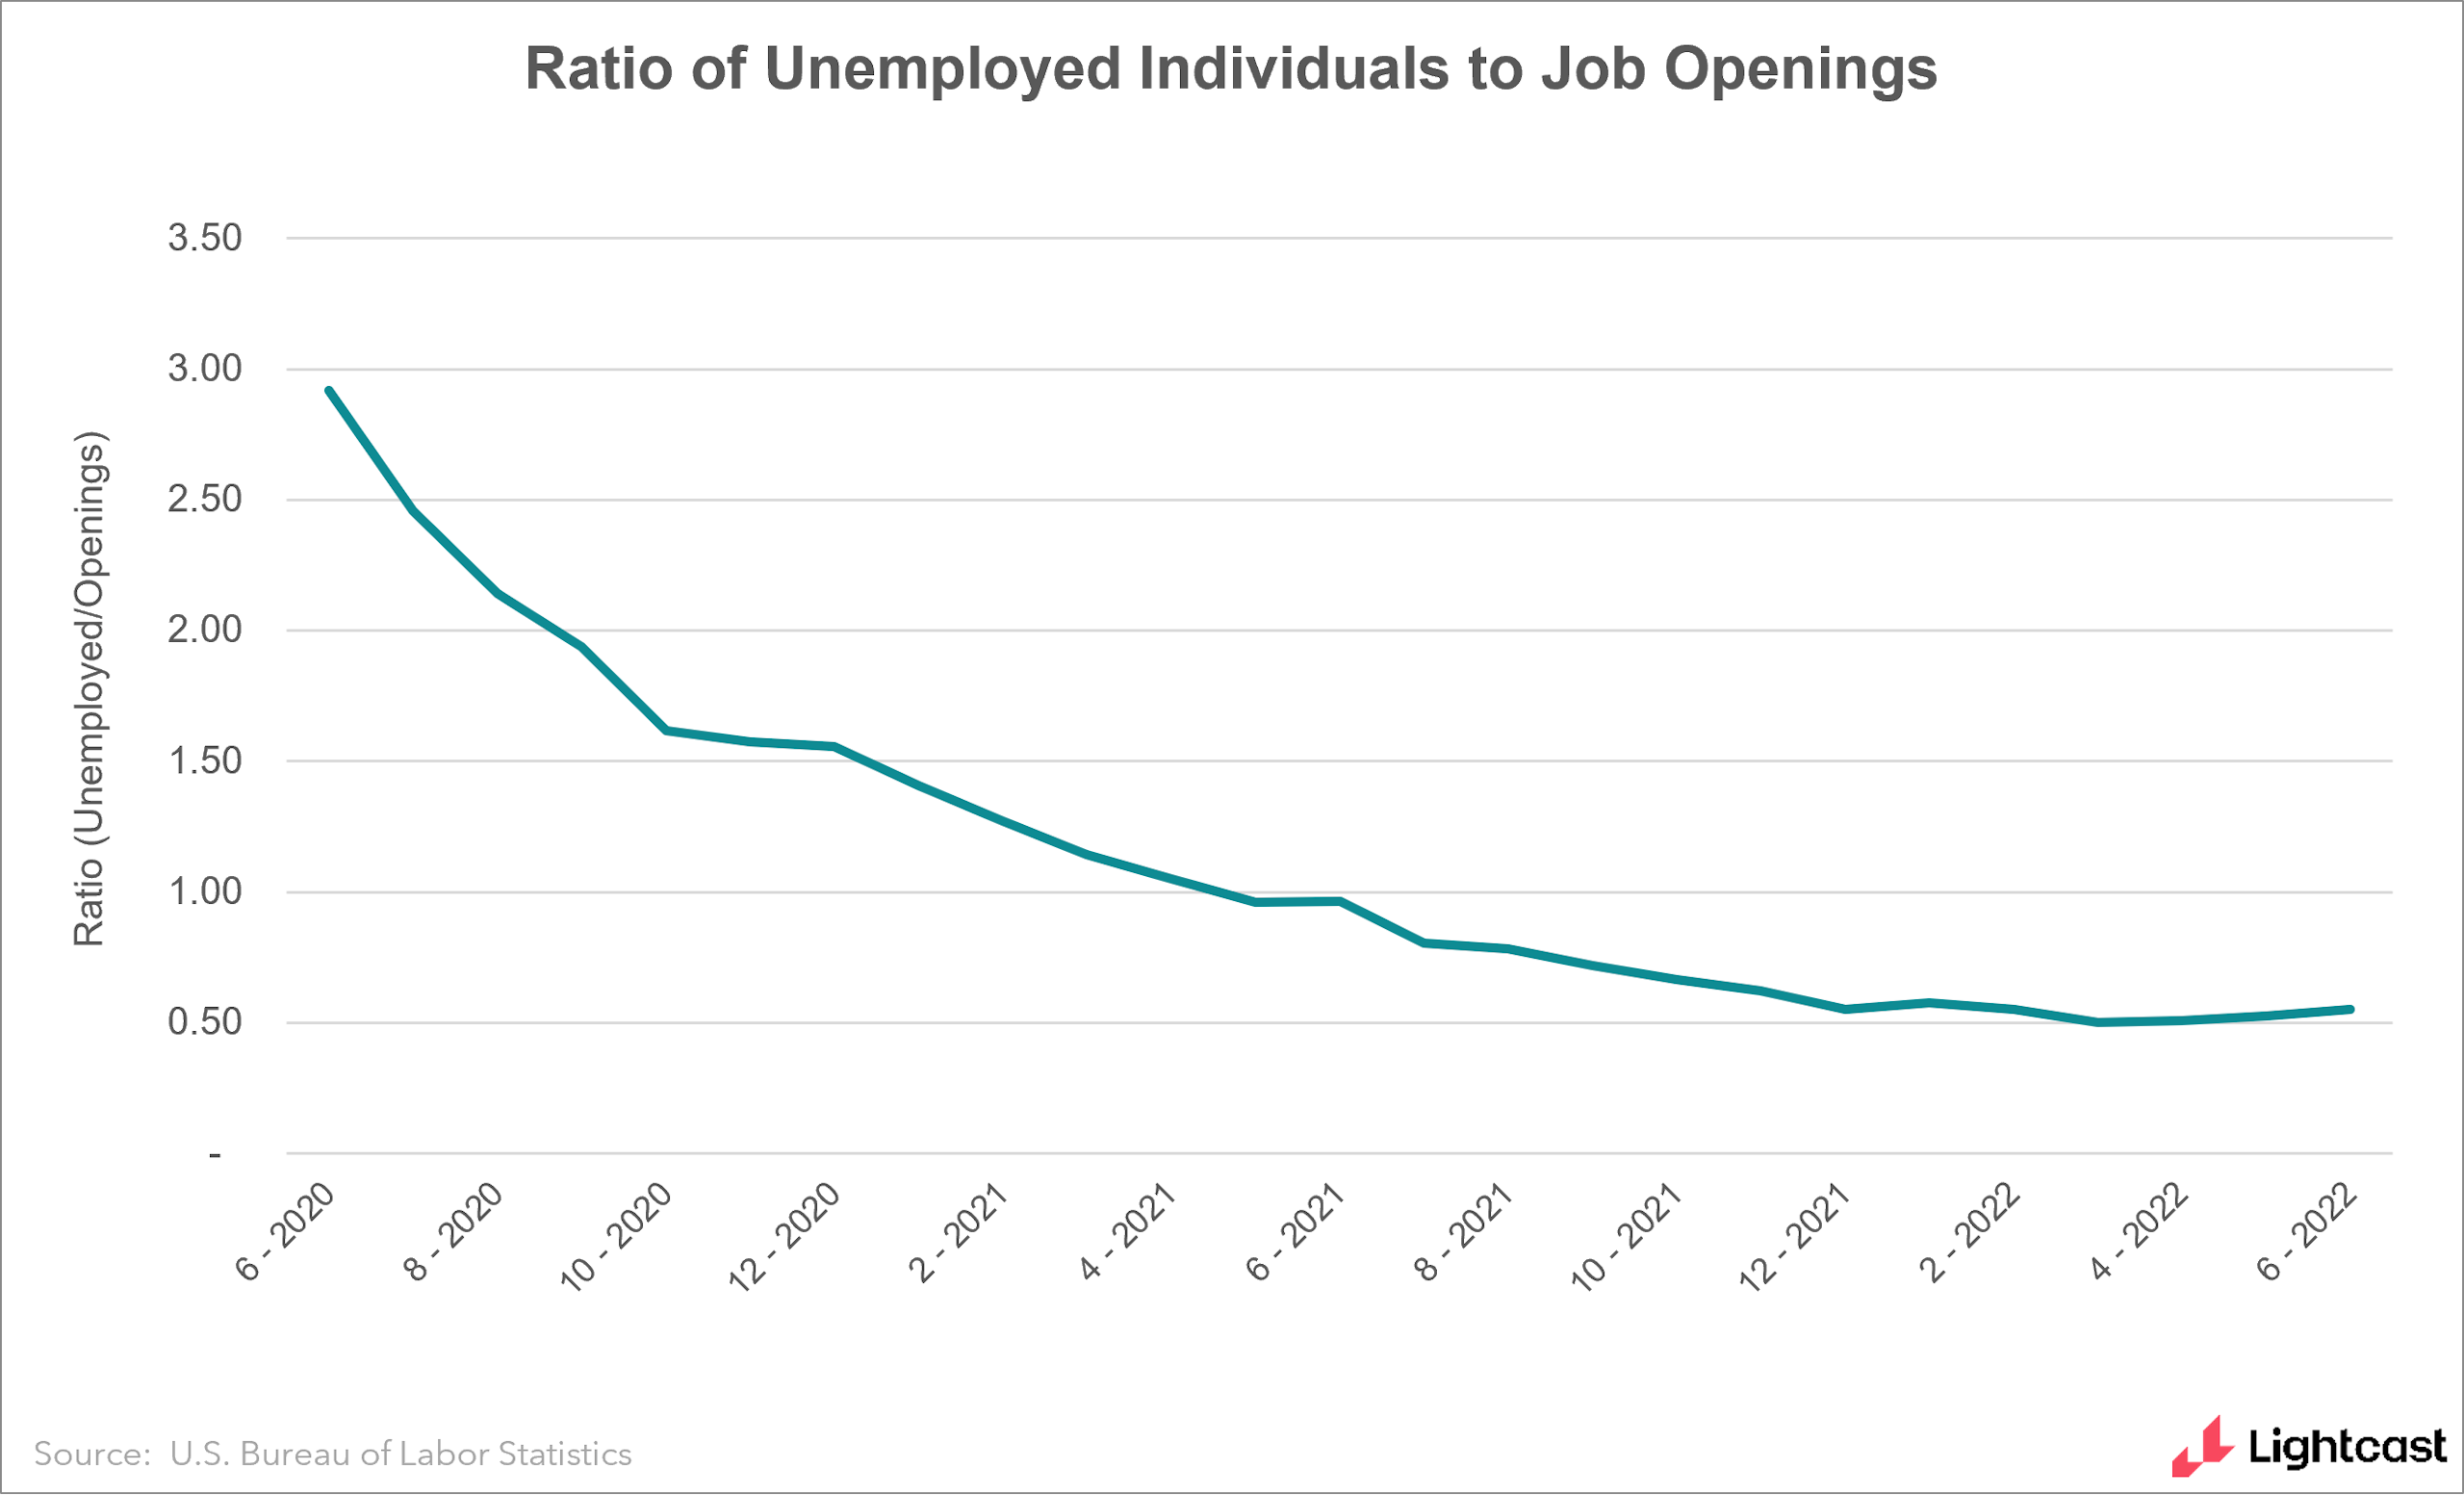 graph of the ratio of unemployed individuals to job openings, showing a steady decline over the past two years